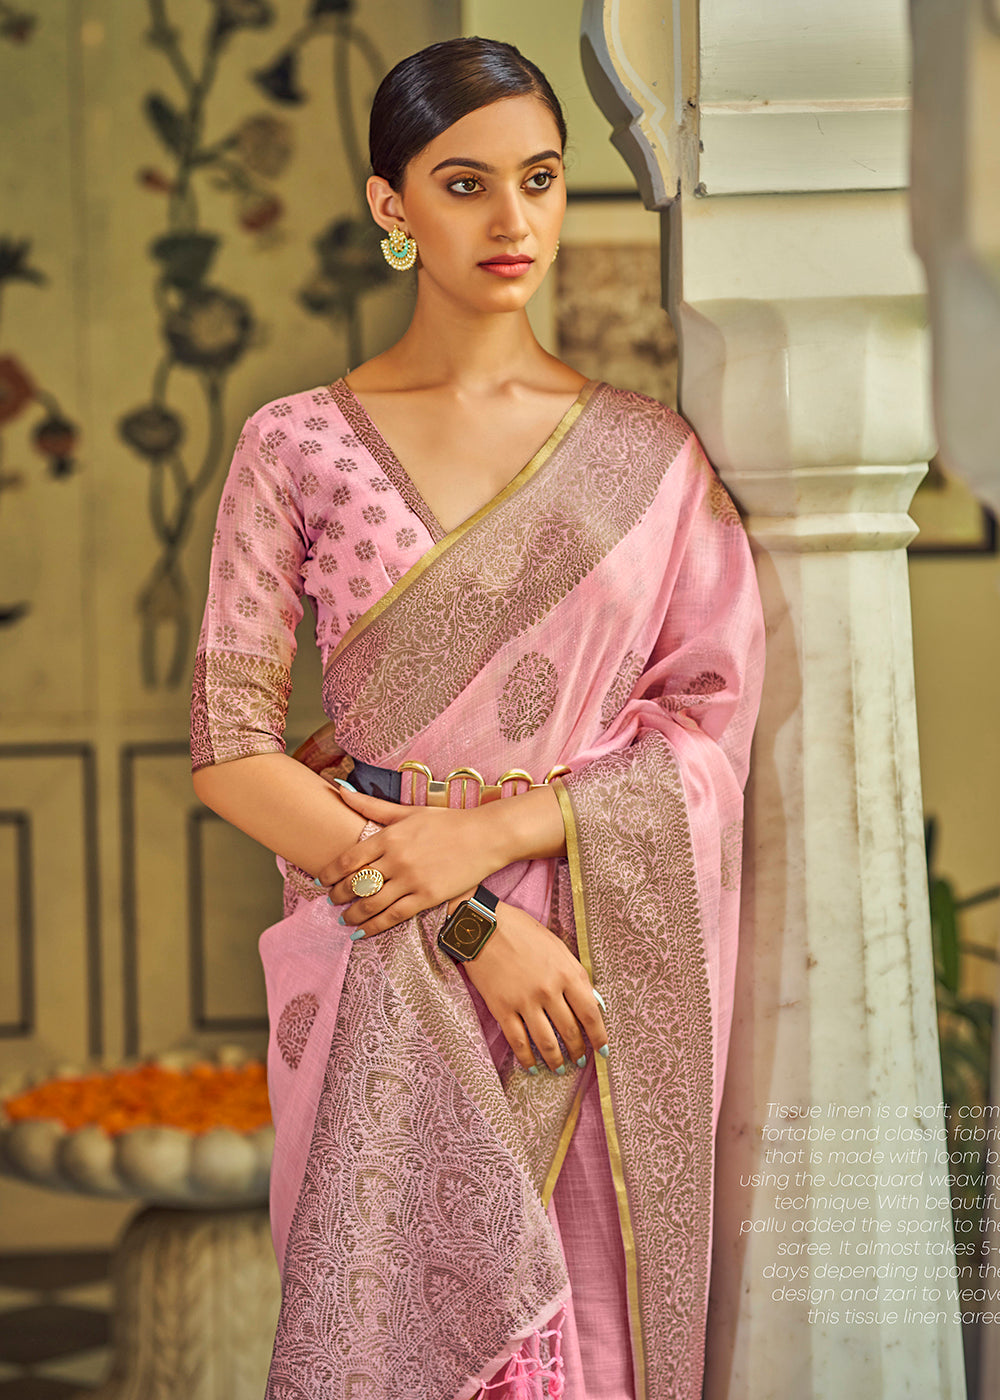 Buy Now Glamorous Flamingo Pink Soft Linen Weaving Saree with Belt Online in USA, UK, Canada & Worldwide at Empress Clothing